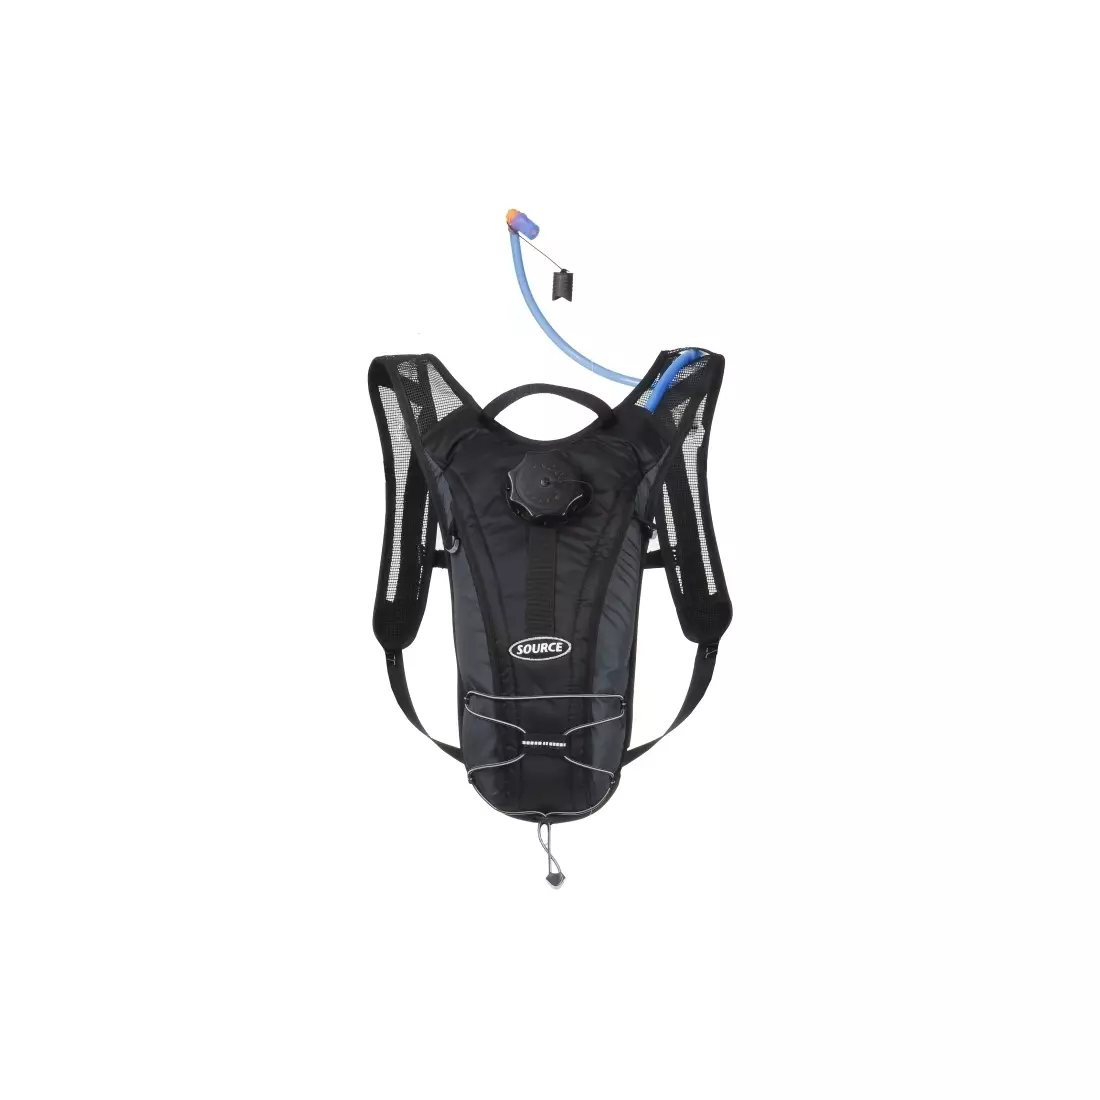 SOURCE SPINNER NC 2.0L backpack with water bladder - color: Black and gray